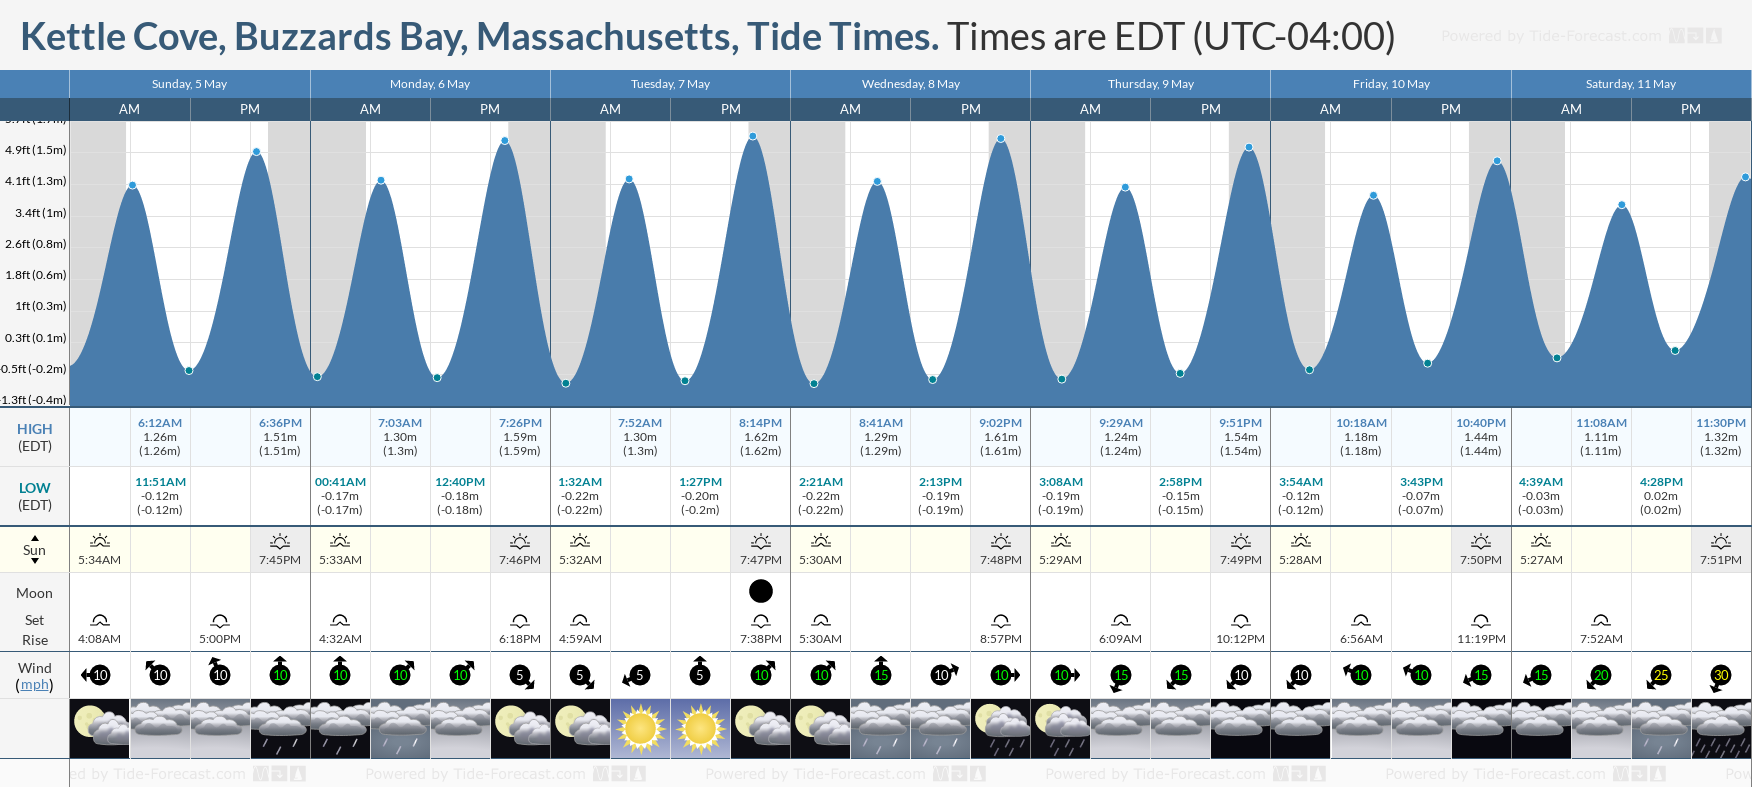 Kettle Cove, Buzzards Bay, Massachusetts Tide Chart including high and low tide tide times for the next 7 days